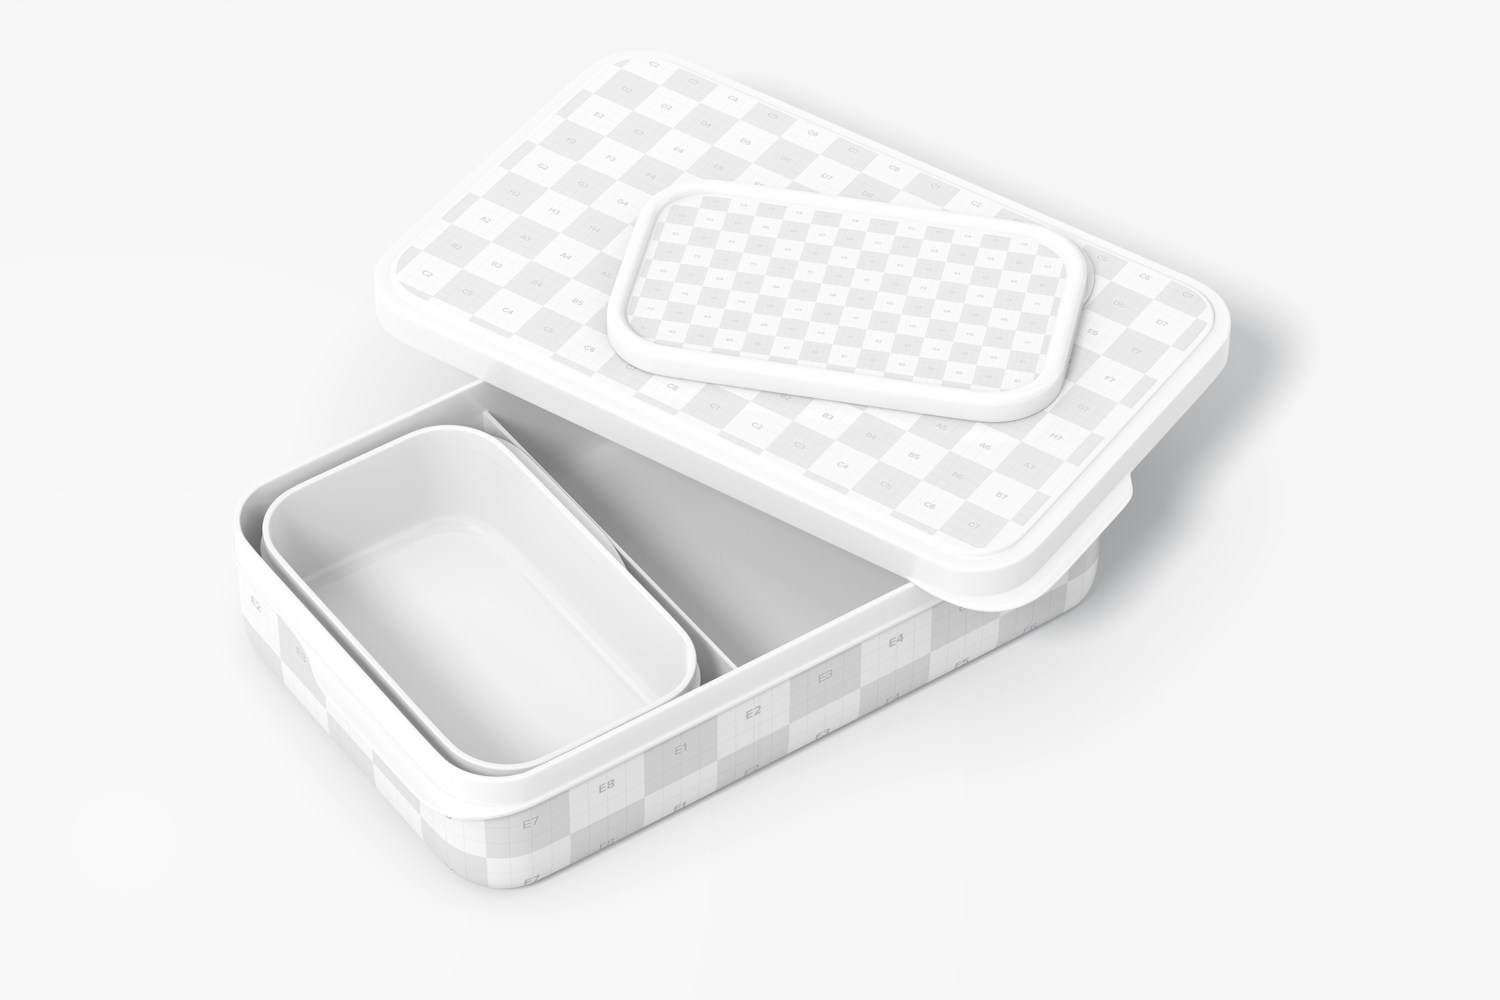 Lunch Boxes Mockup, Opened